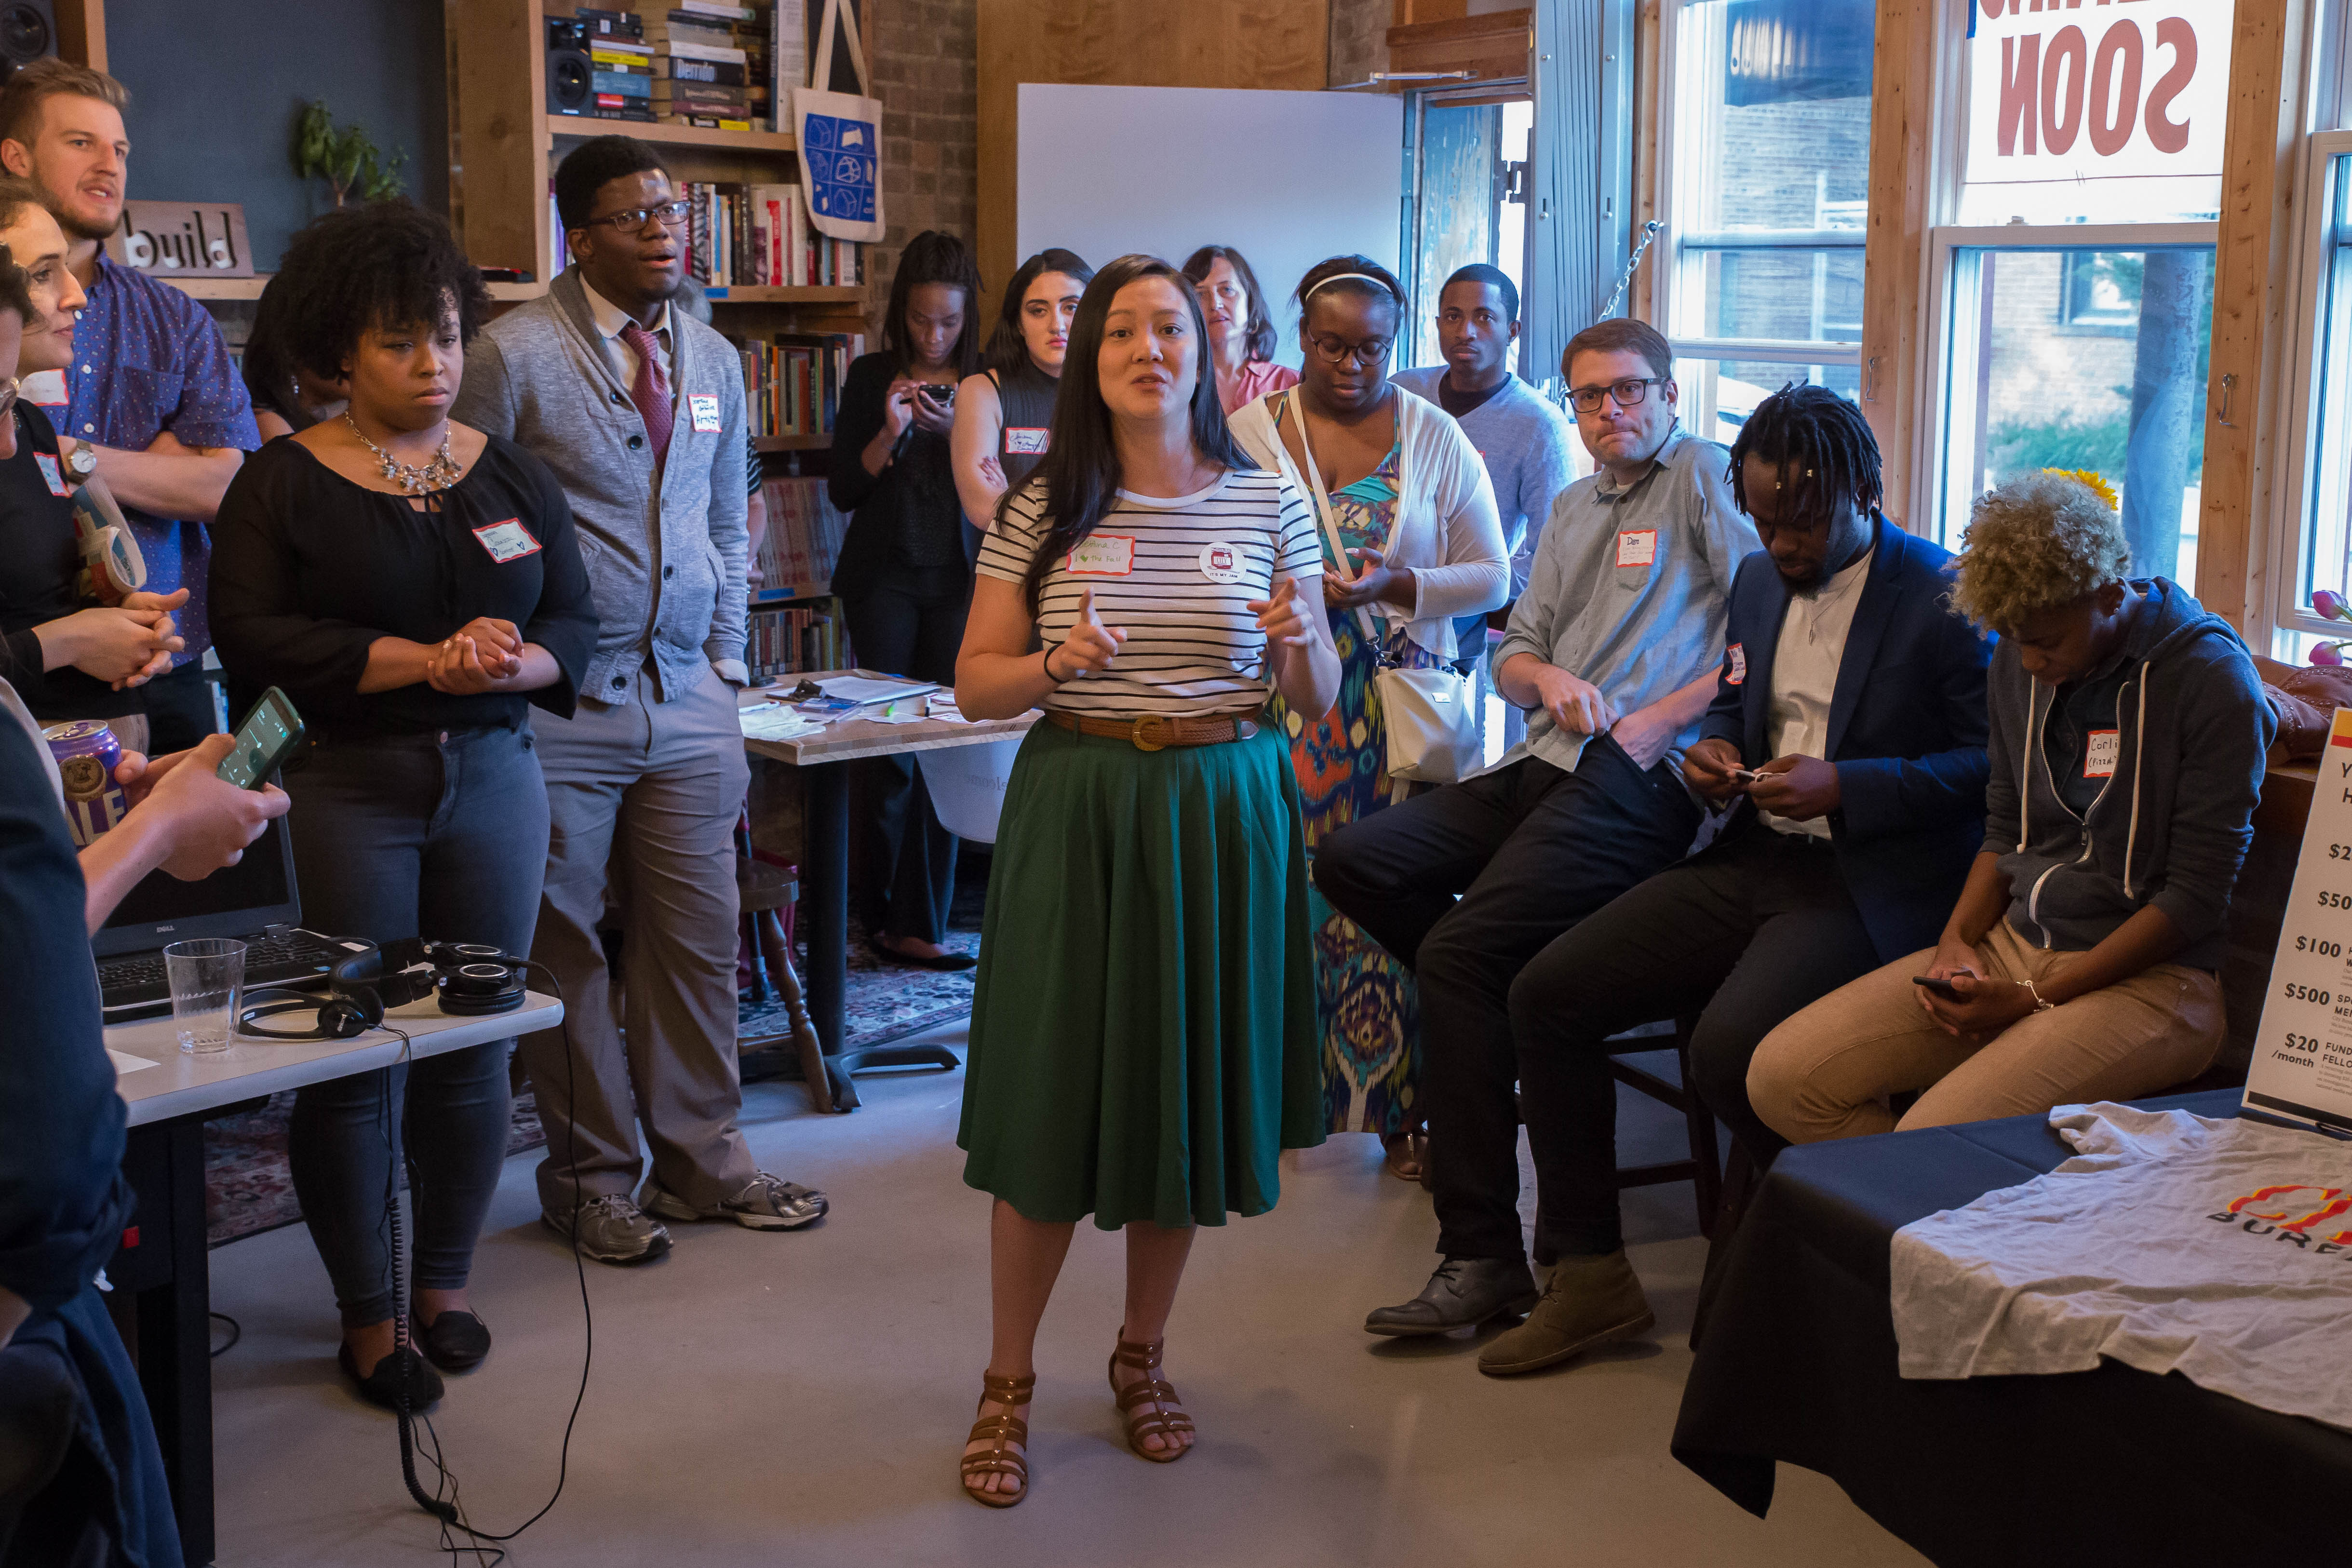 Bettina Chang, co-founder and editorial director of City Bureau, leads an event where City Bureau's reporters presented their work to community members